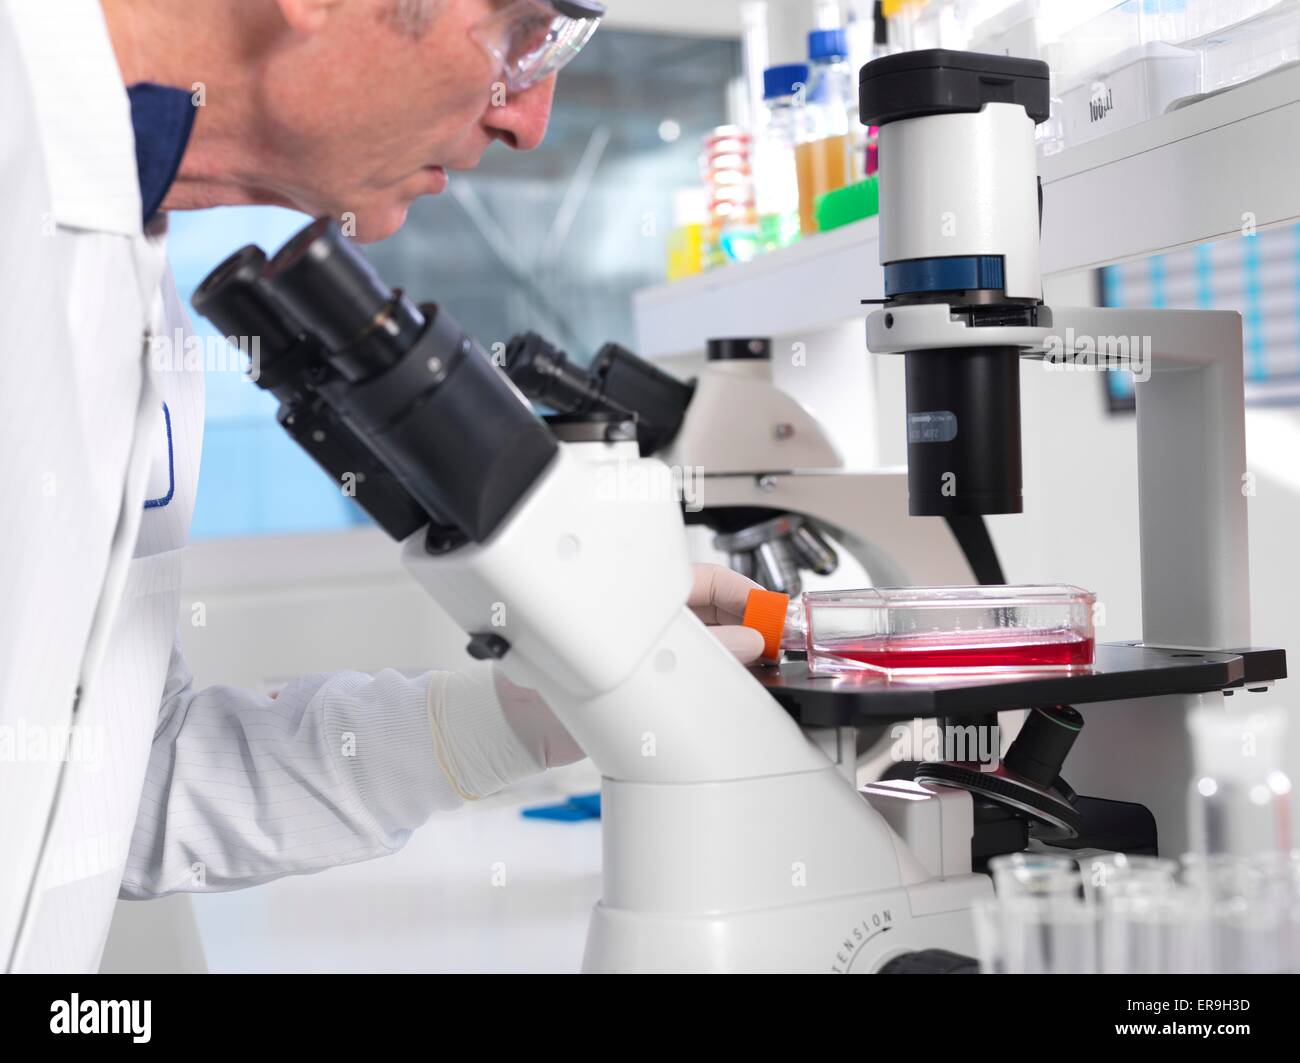 PROPERTY RELEASED. MODEL RELEASED. Stem Cell Research. Laboratory researcher using a light microscope to examine stem cells in a culture jar. Stock Photo